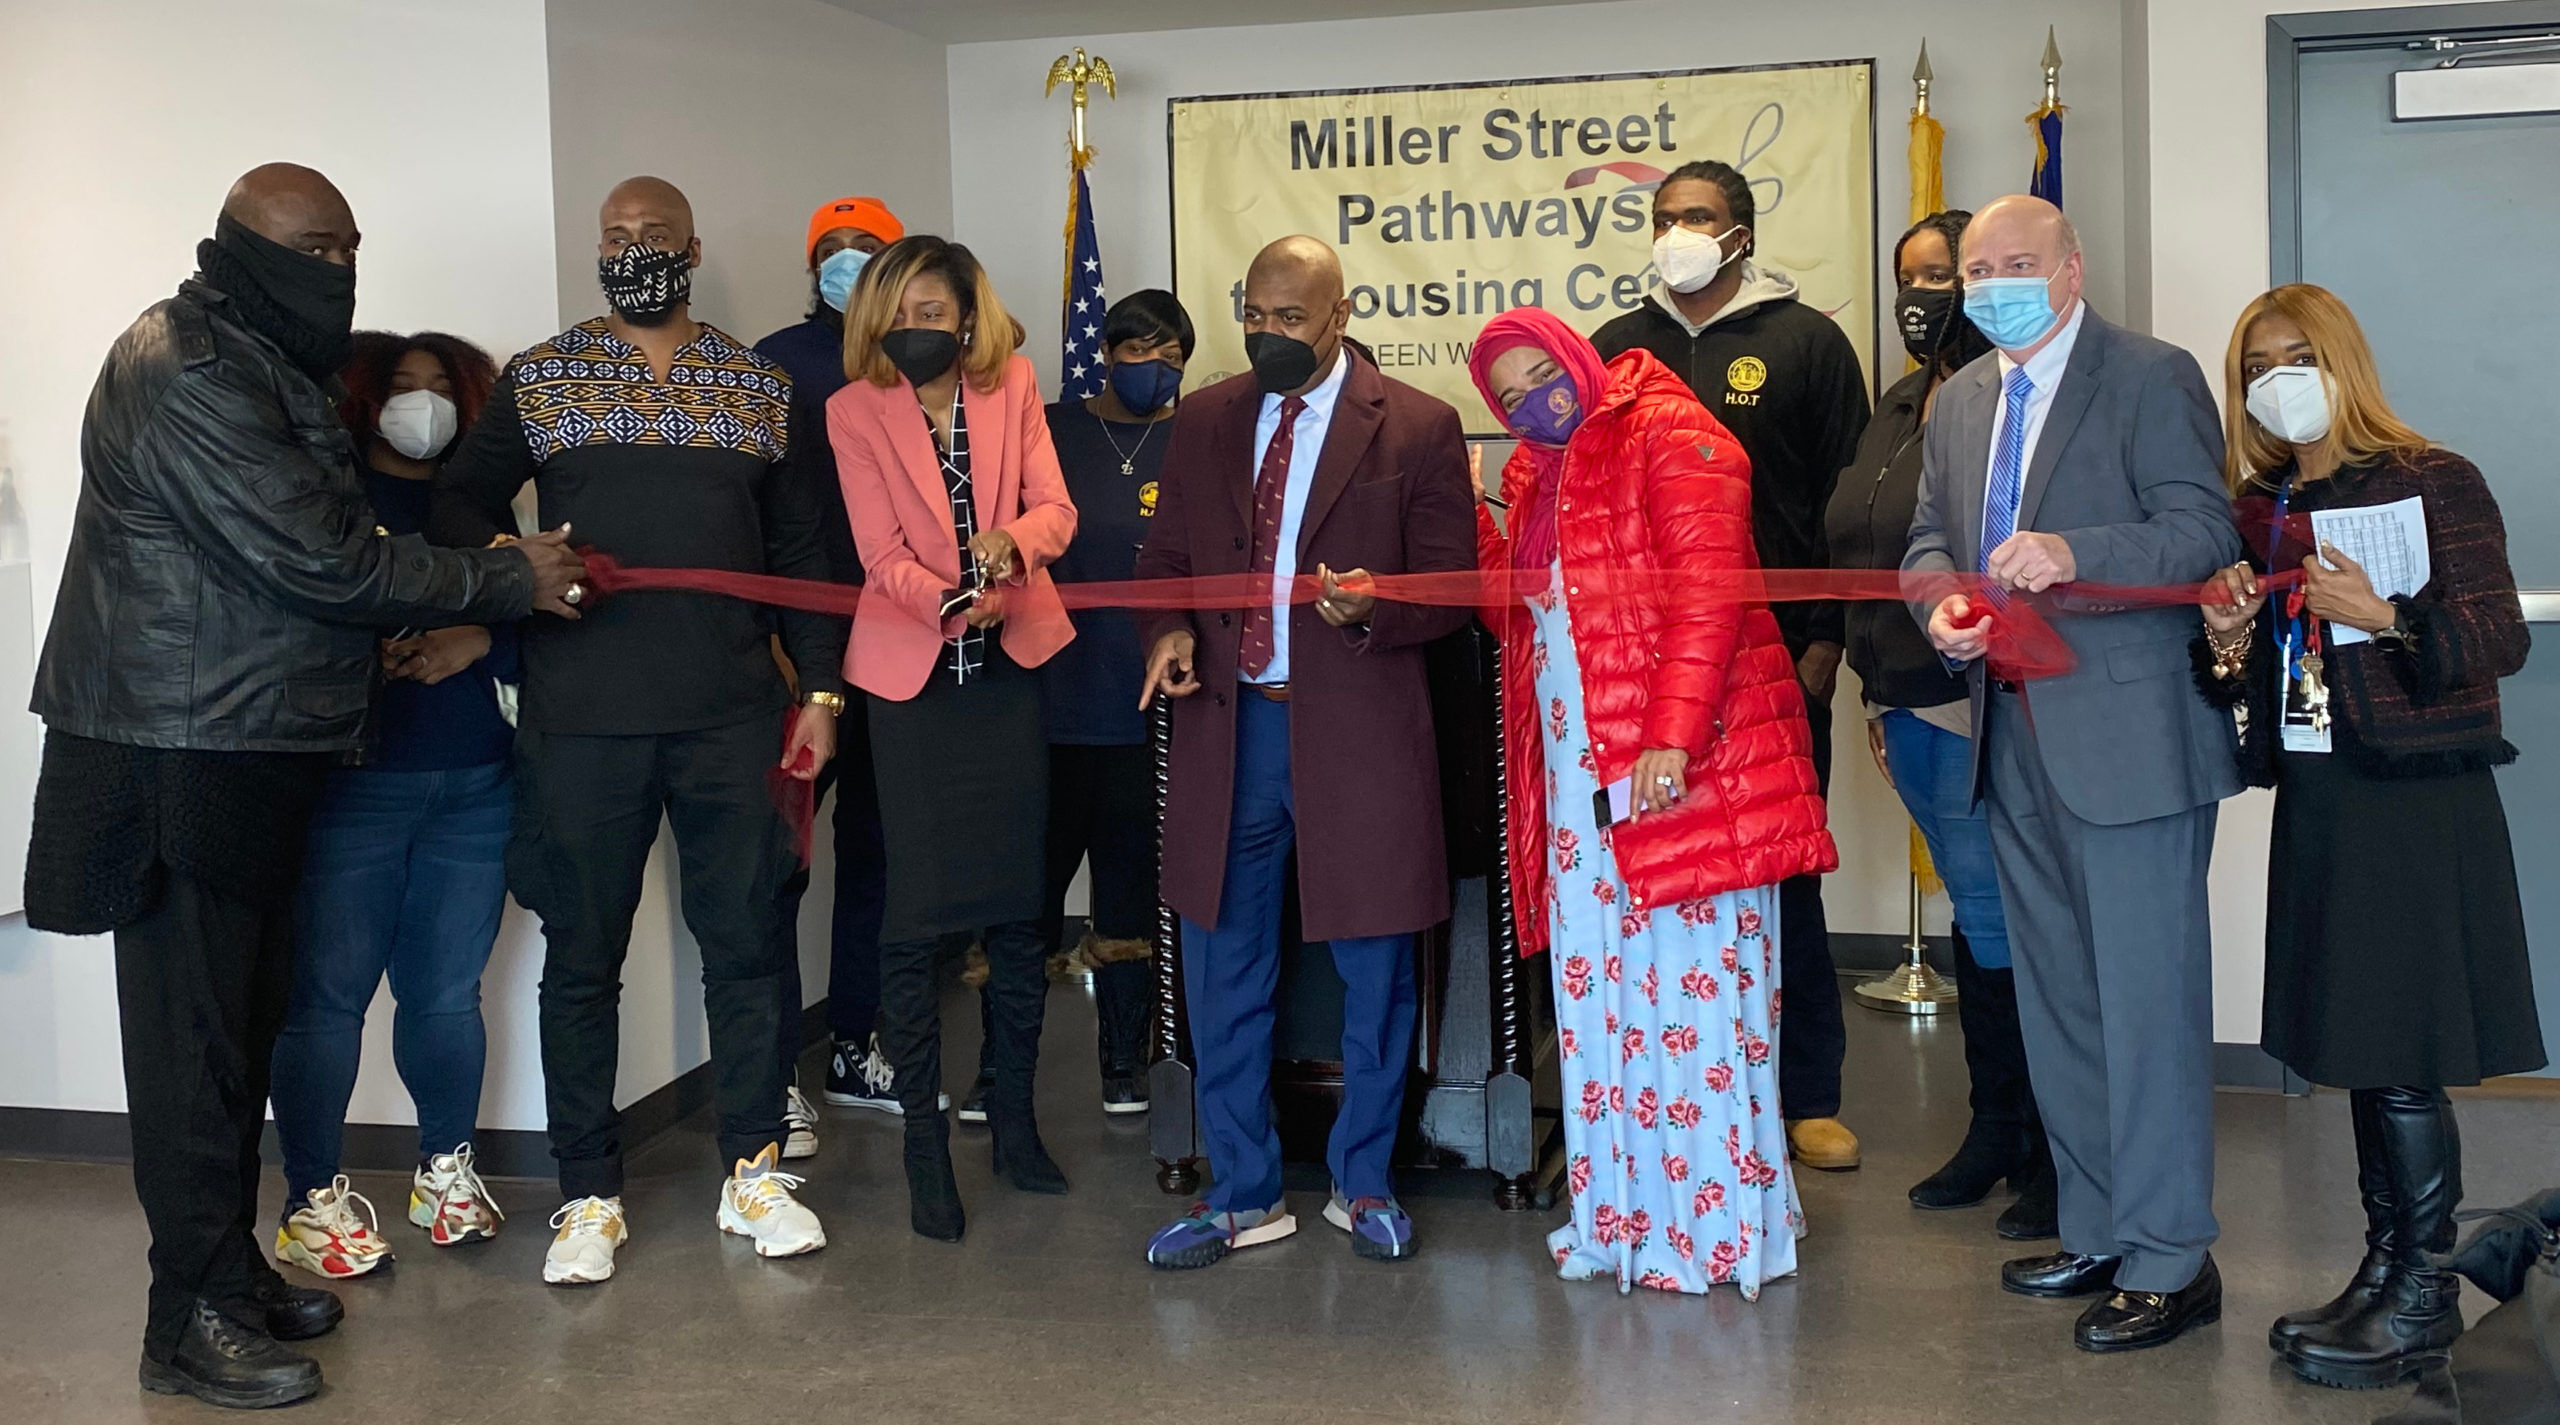 On Feb. 1, Catholic Charities of the Archdiocese of Newark and the city officially opened the doors to the Miller Street Pathways to Housing Center in Newark. (Photo Courtesy of Catholic Charities of the Archdiocese of Newark)